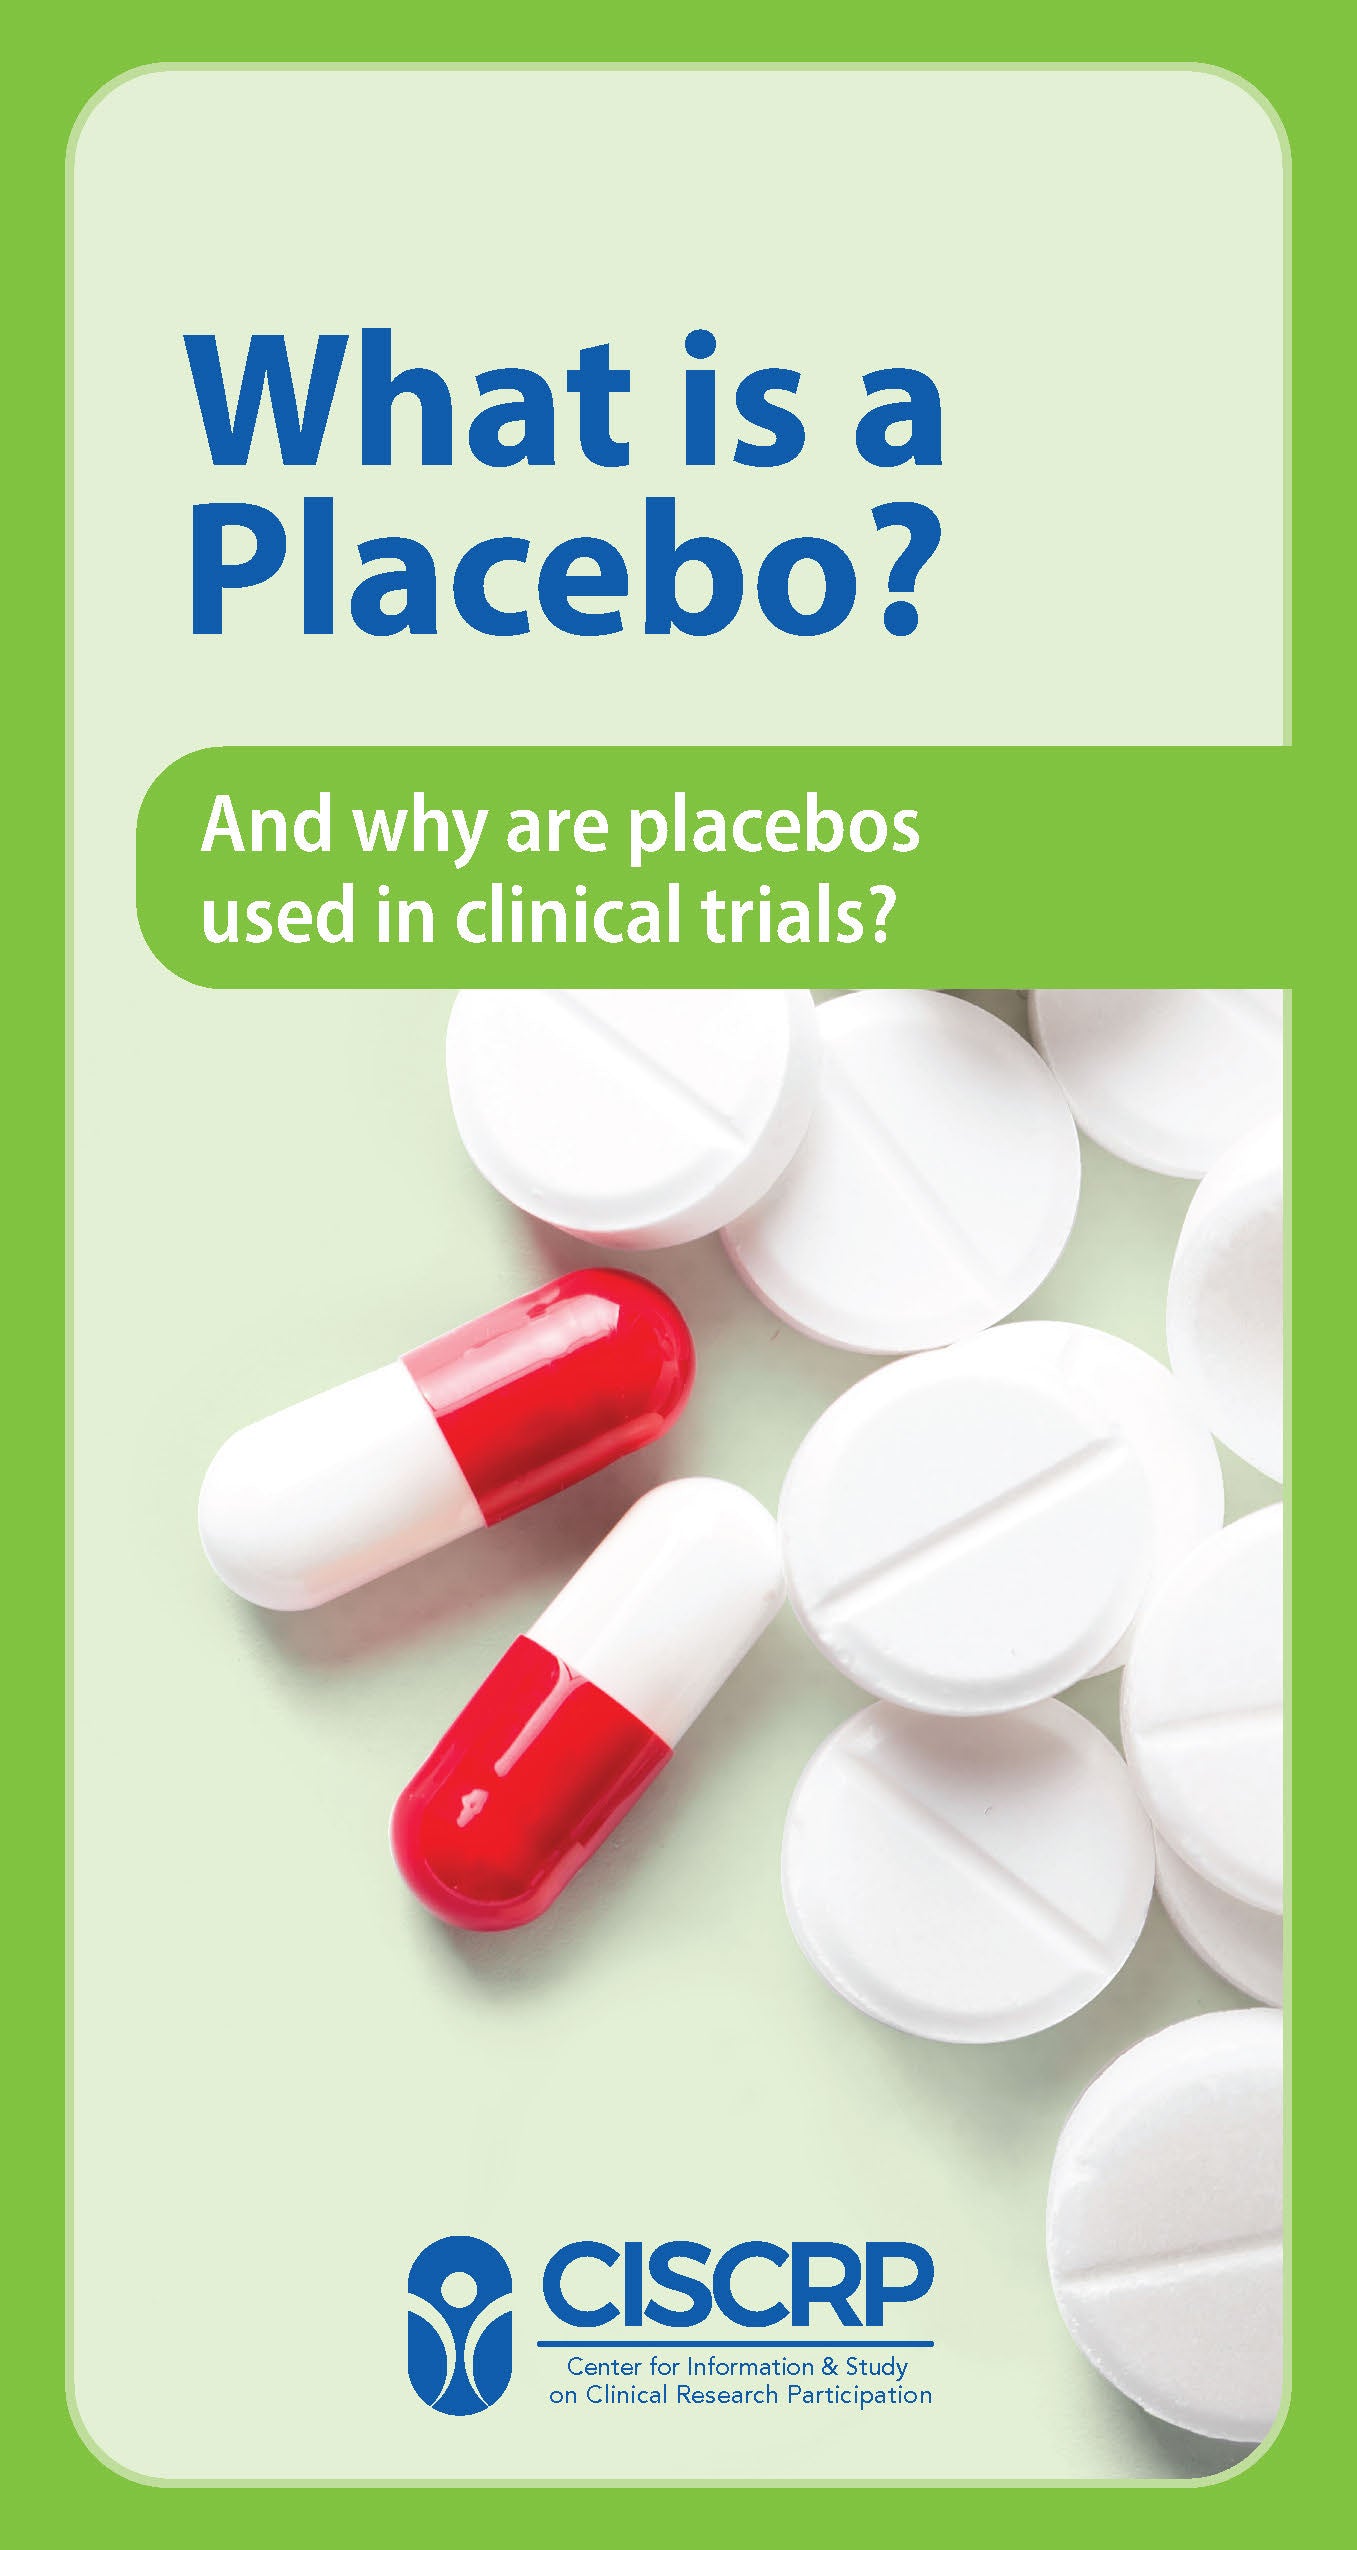 What is a Placebo?